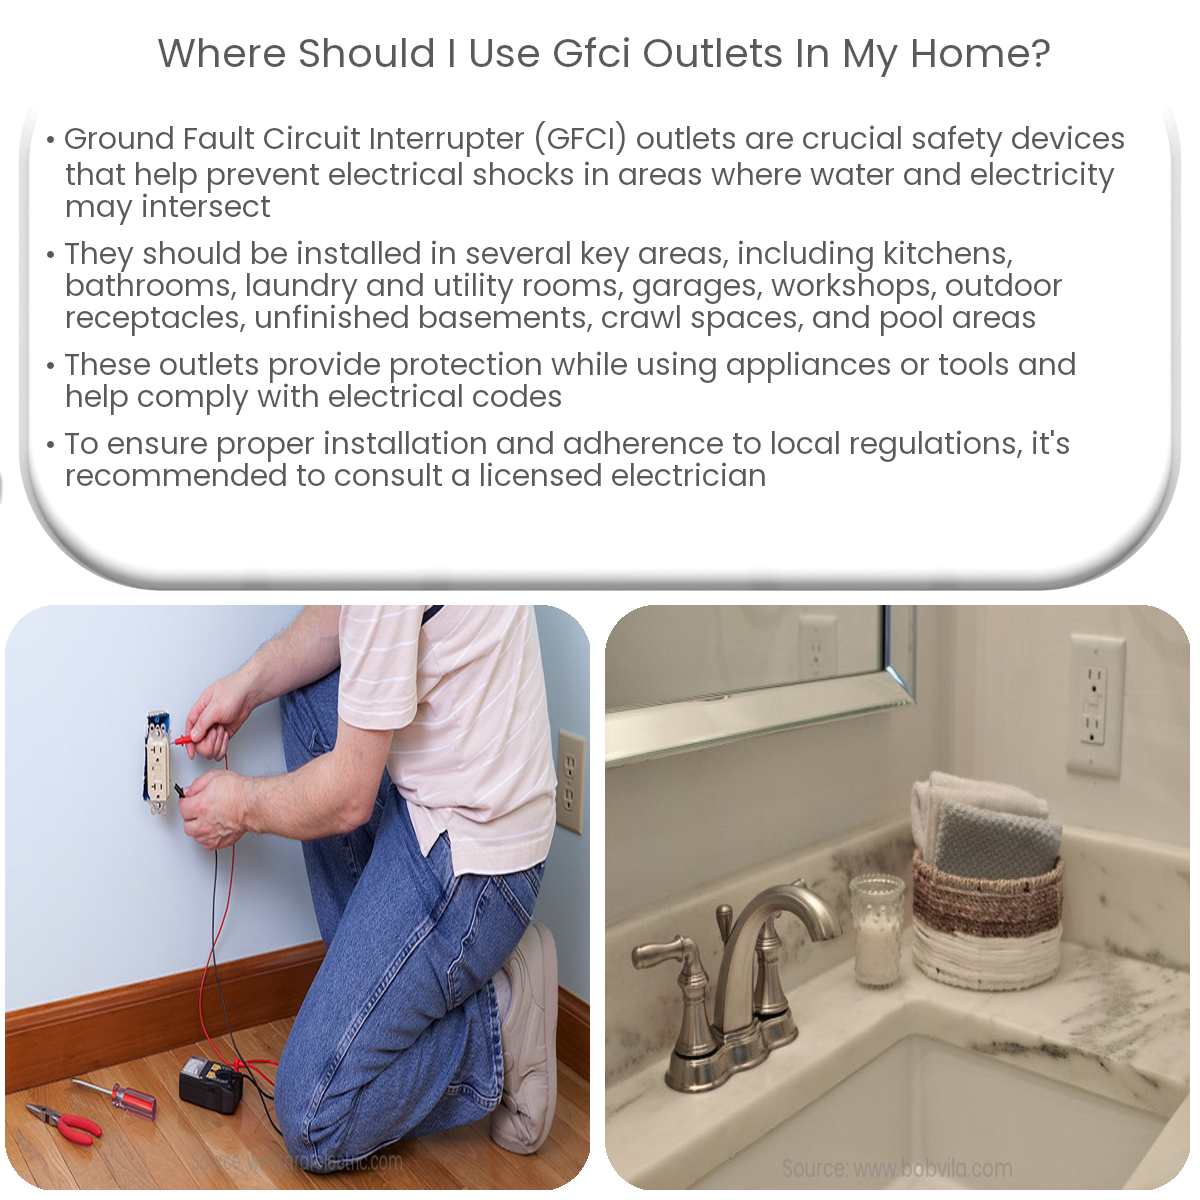 Where should I use GFCI outlets in my home?